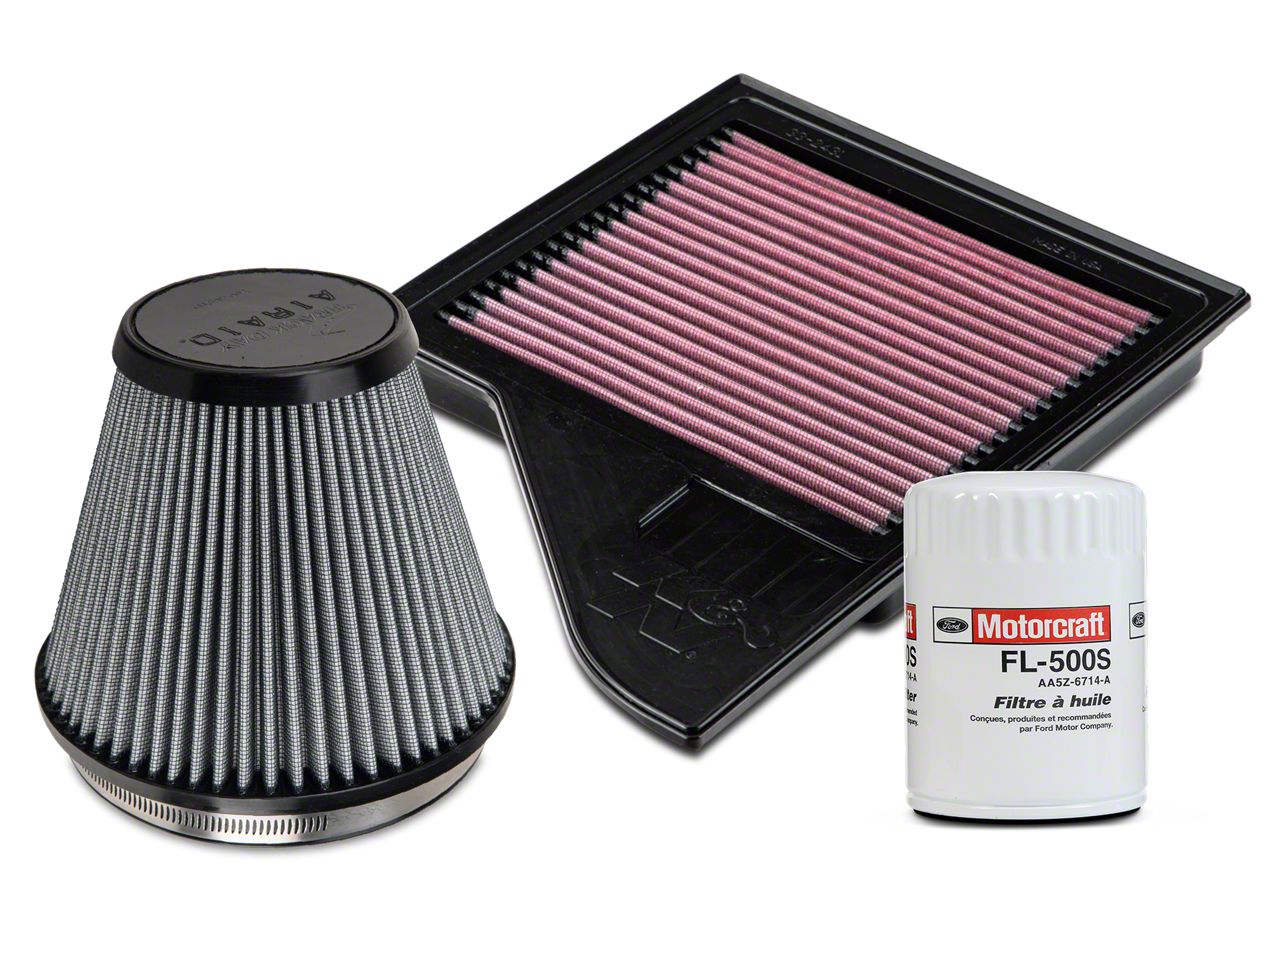 Air, Oil, & Fuel Filters